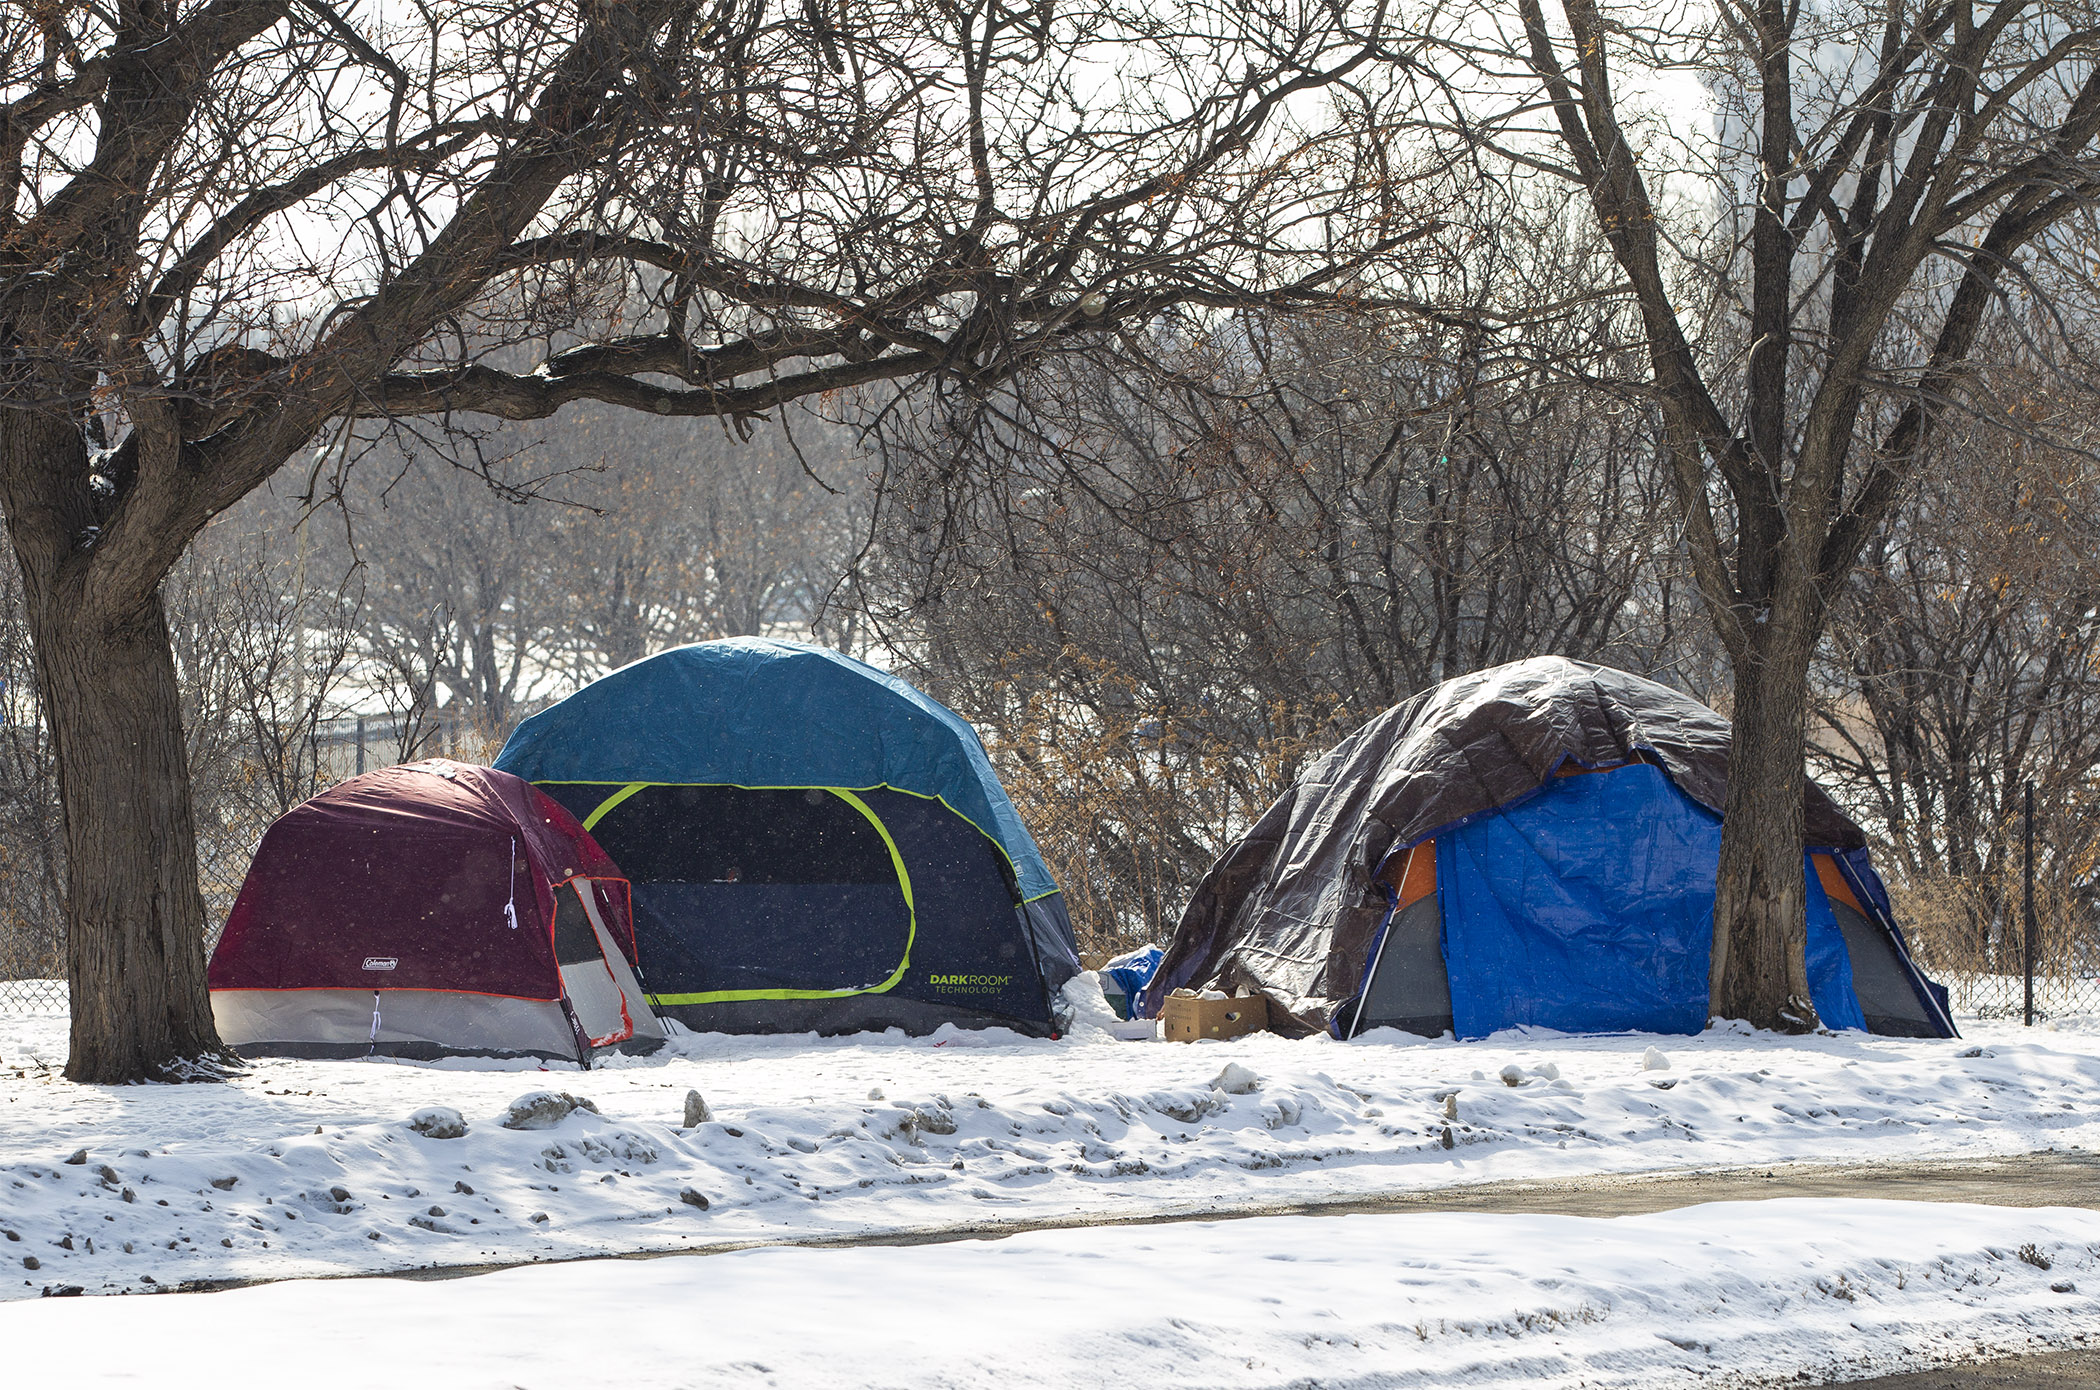 HF3294 would appropriate an additional $35 million in fiscal year 2023 and set a base appropriation of $30 million in fiscal years 2024 and 2025 to fund emergency services for homeless people, such as emergency shelters. (House Photography file photo)